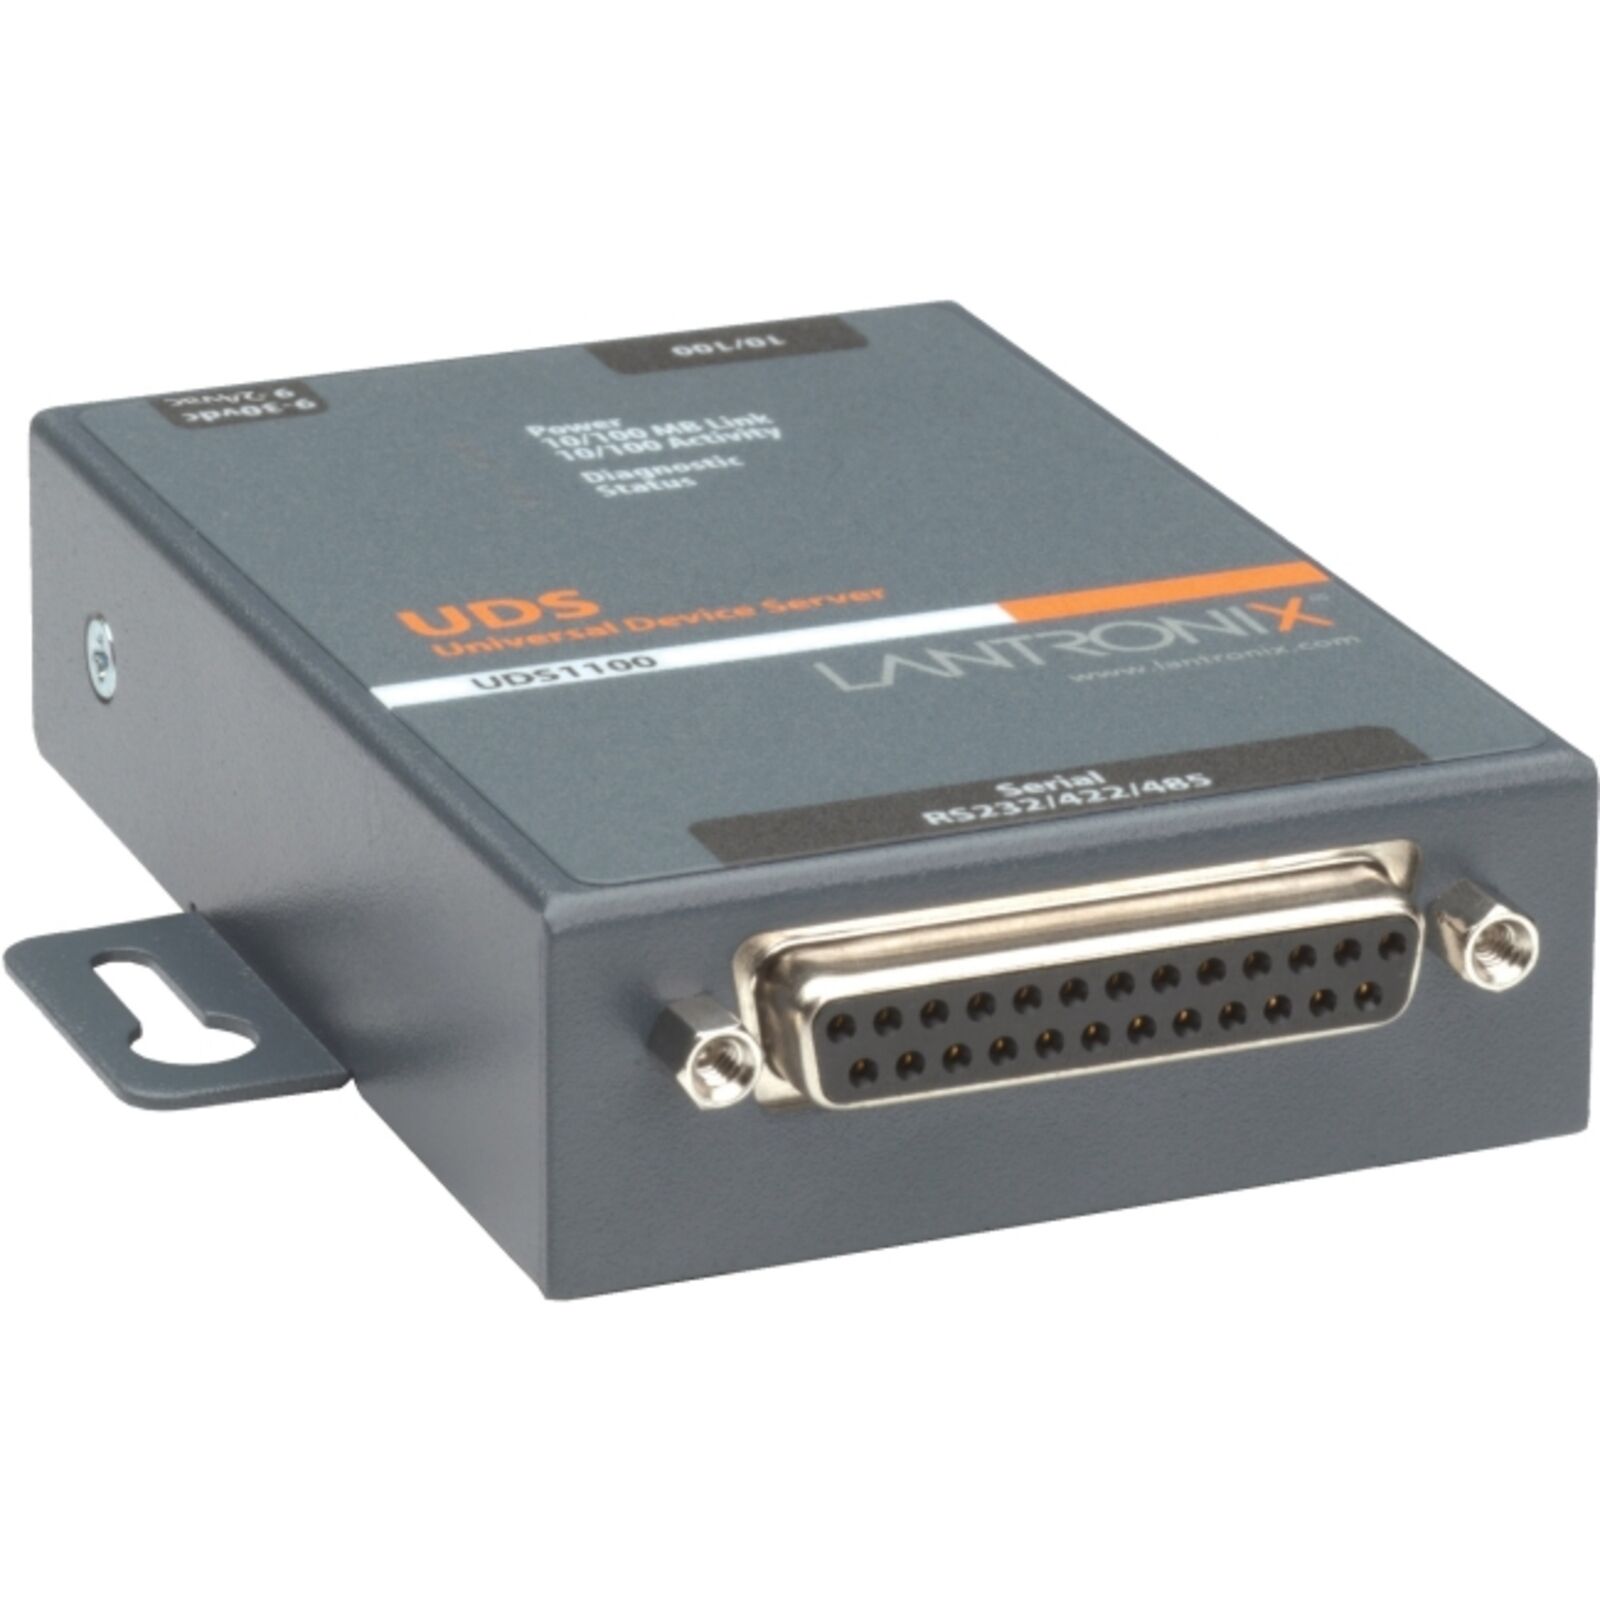 Lantronix - UD1100001-01 - Lantronix UDS1100 - One Port Serial (RS232/ RS422/